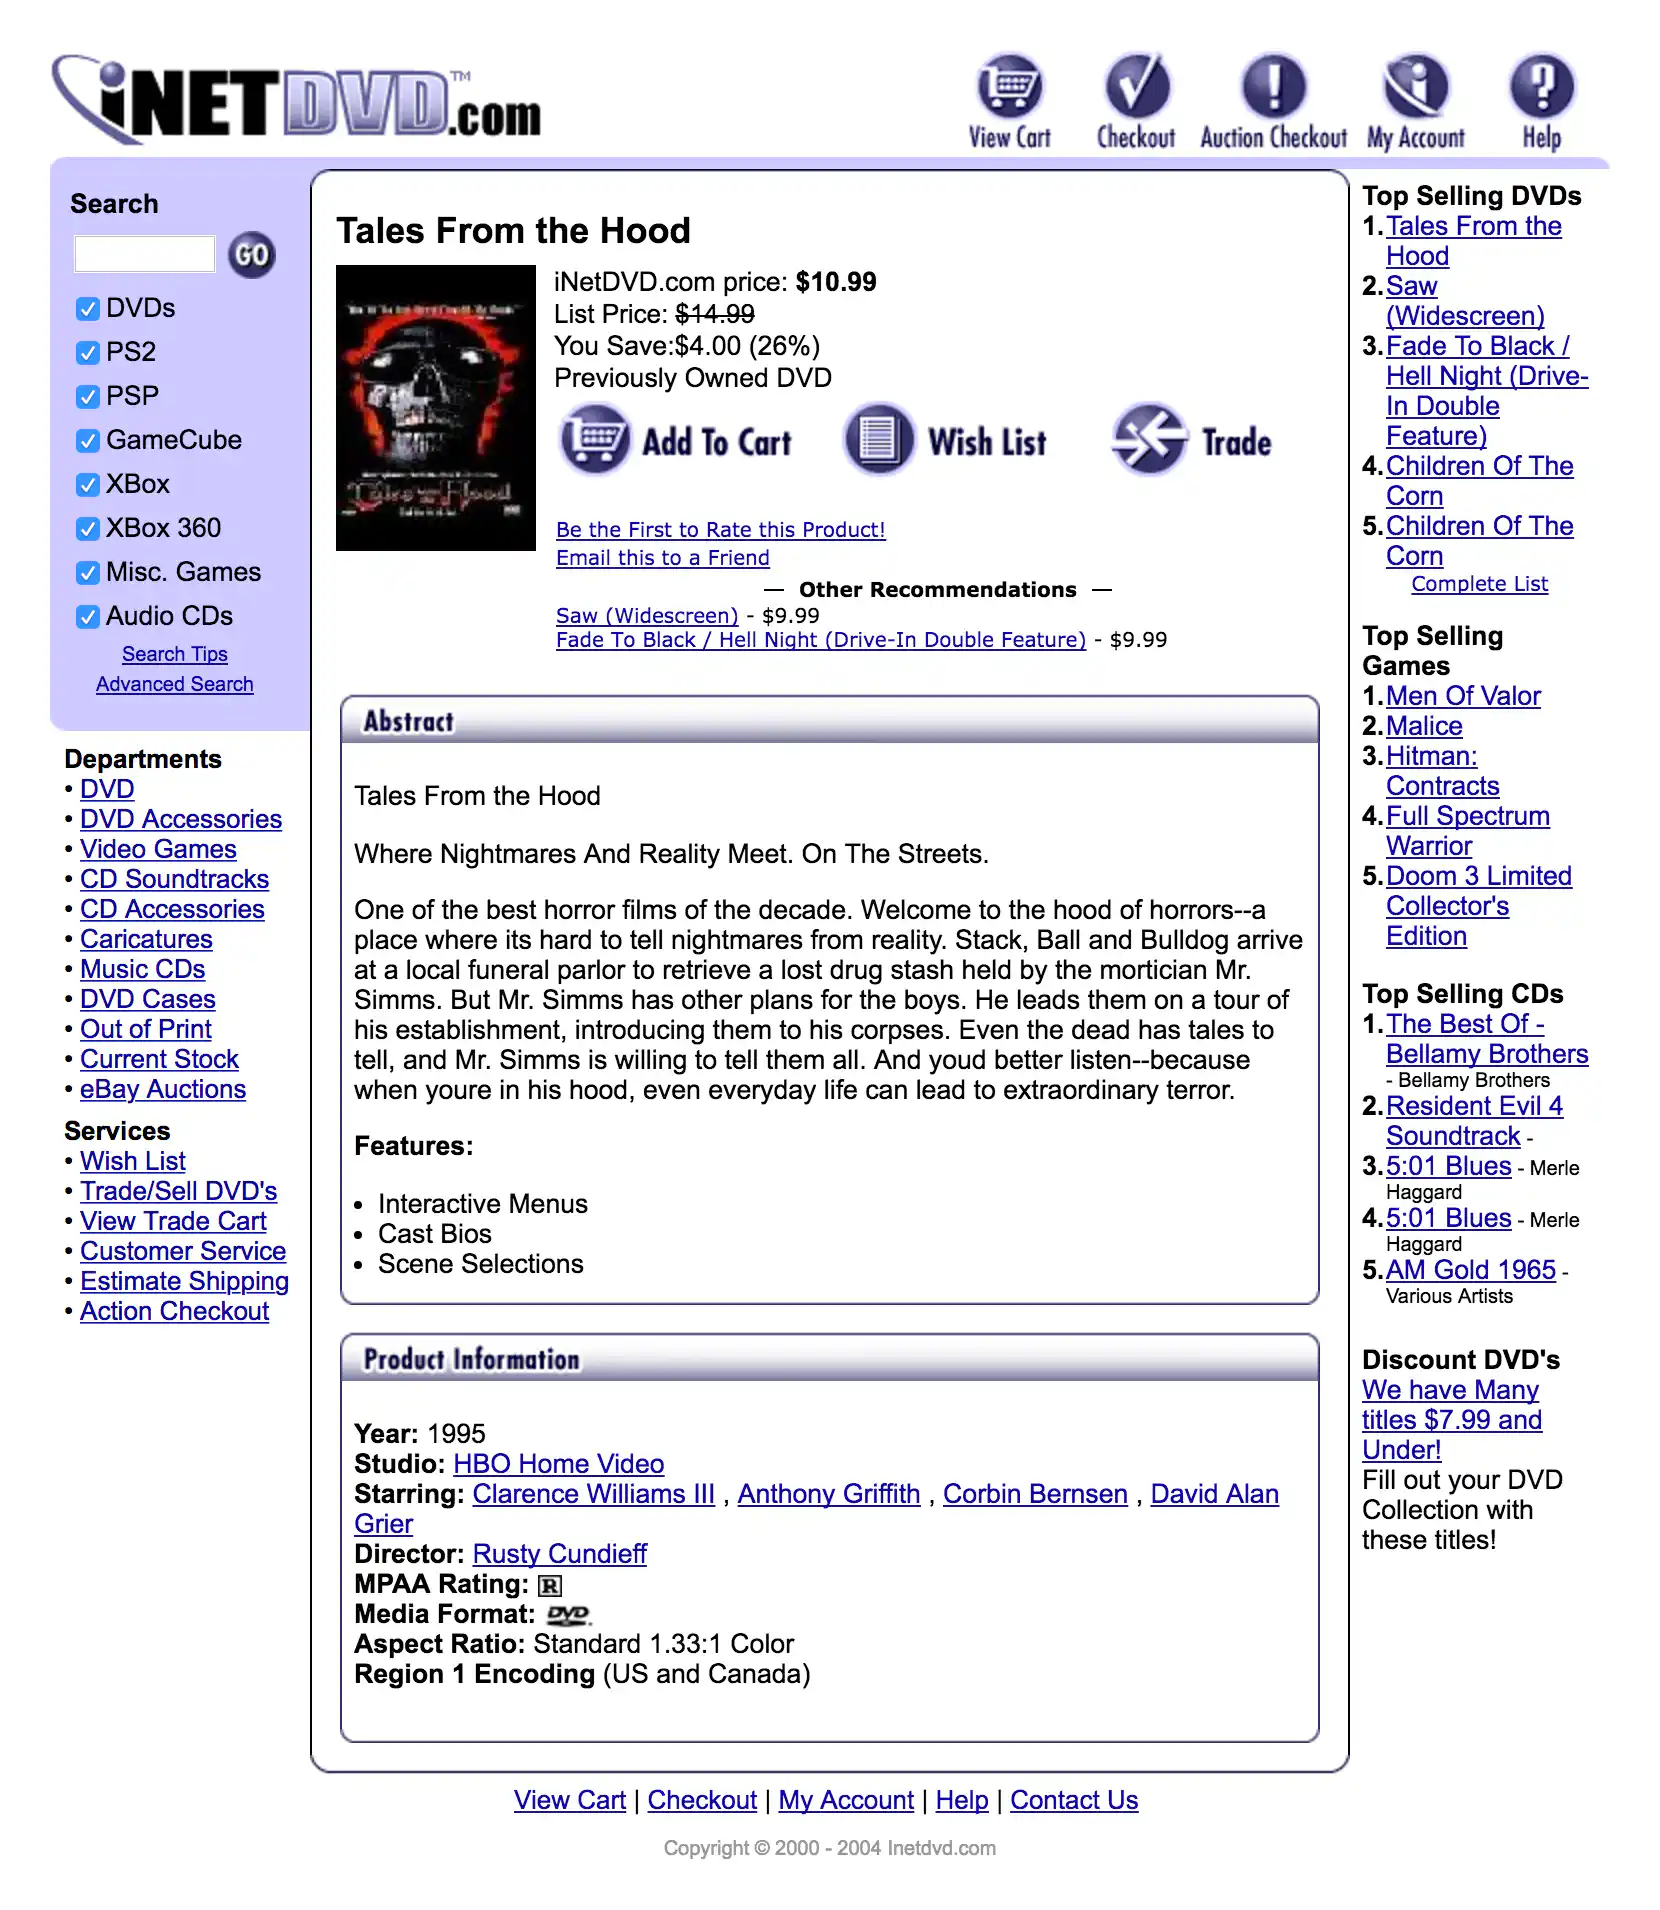 iNetDVD.com Website Product Detail Page Design 2003